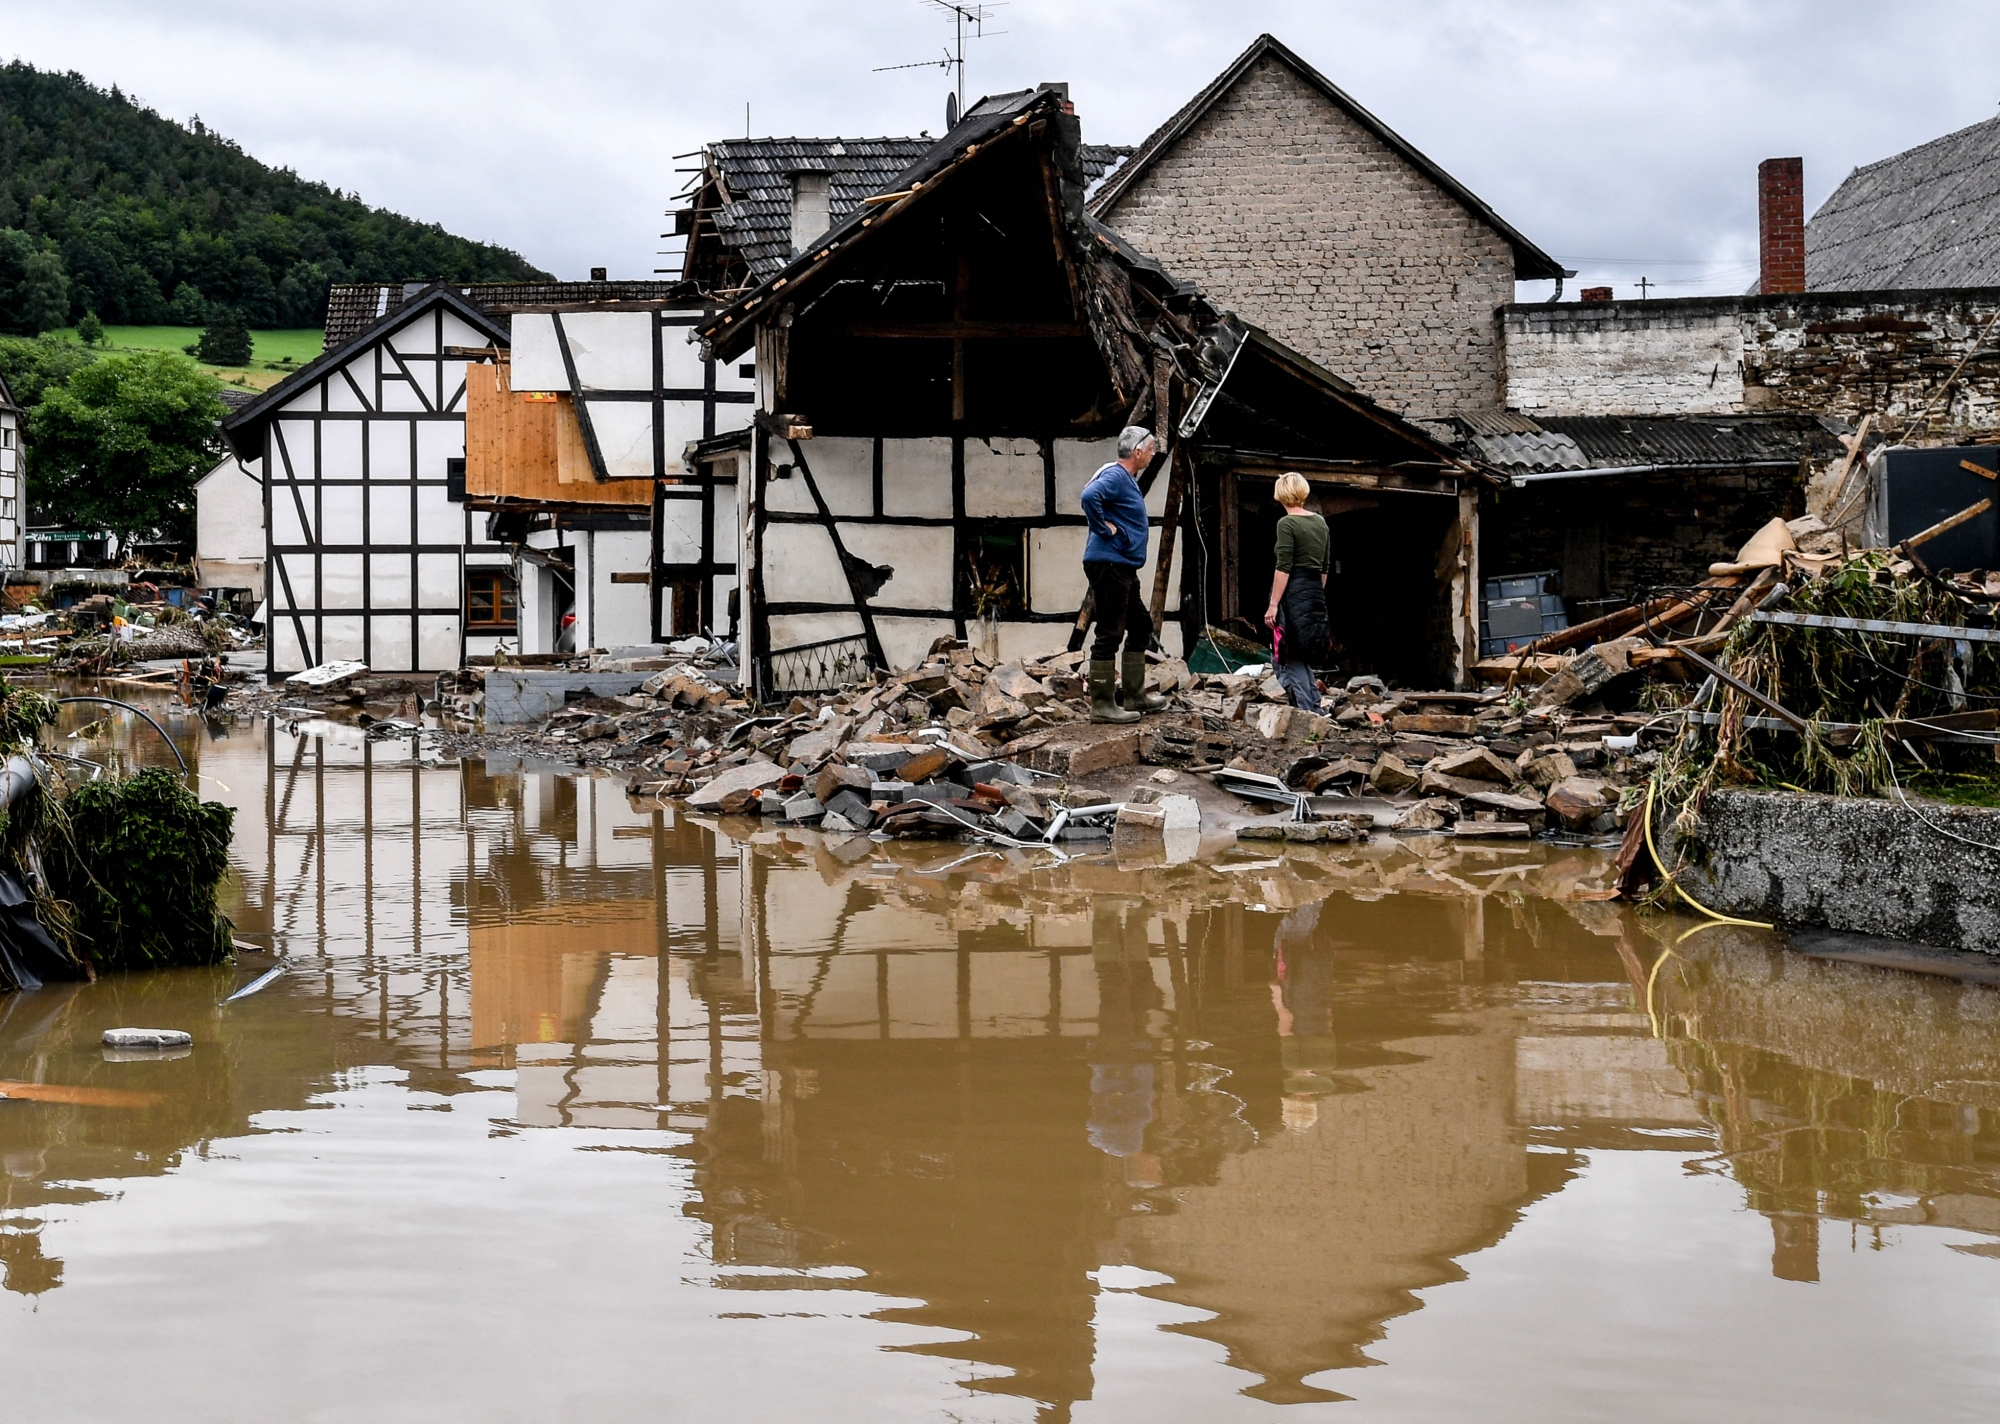 epa09345968 Local residents inspect a collapsed house after heavy flooding of the river Ahr, in Schuld, Germany, 15 July 2021. Large parts of Western Germany were hit by heavy, continuous rain in the night to 15 July, resulting in local flash floods that destroyed buildings and swept away cars EPA/SASCHA STEINBACH